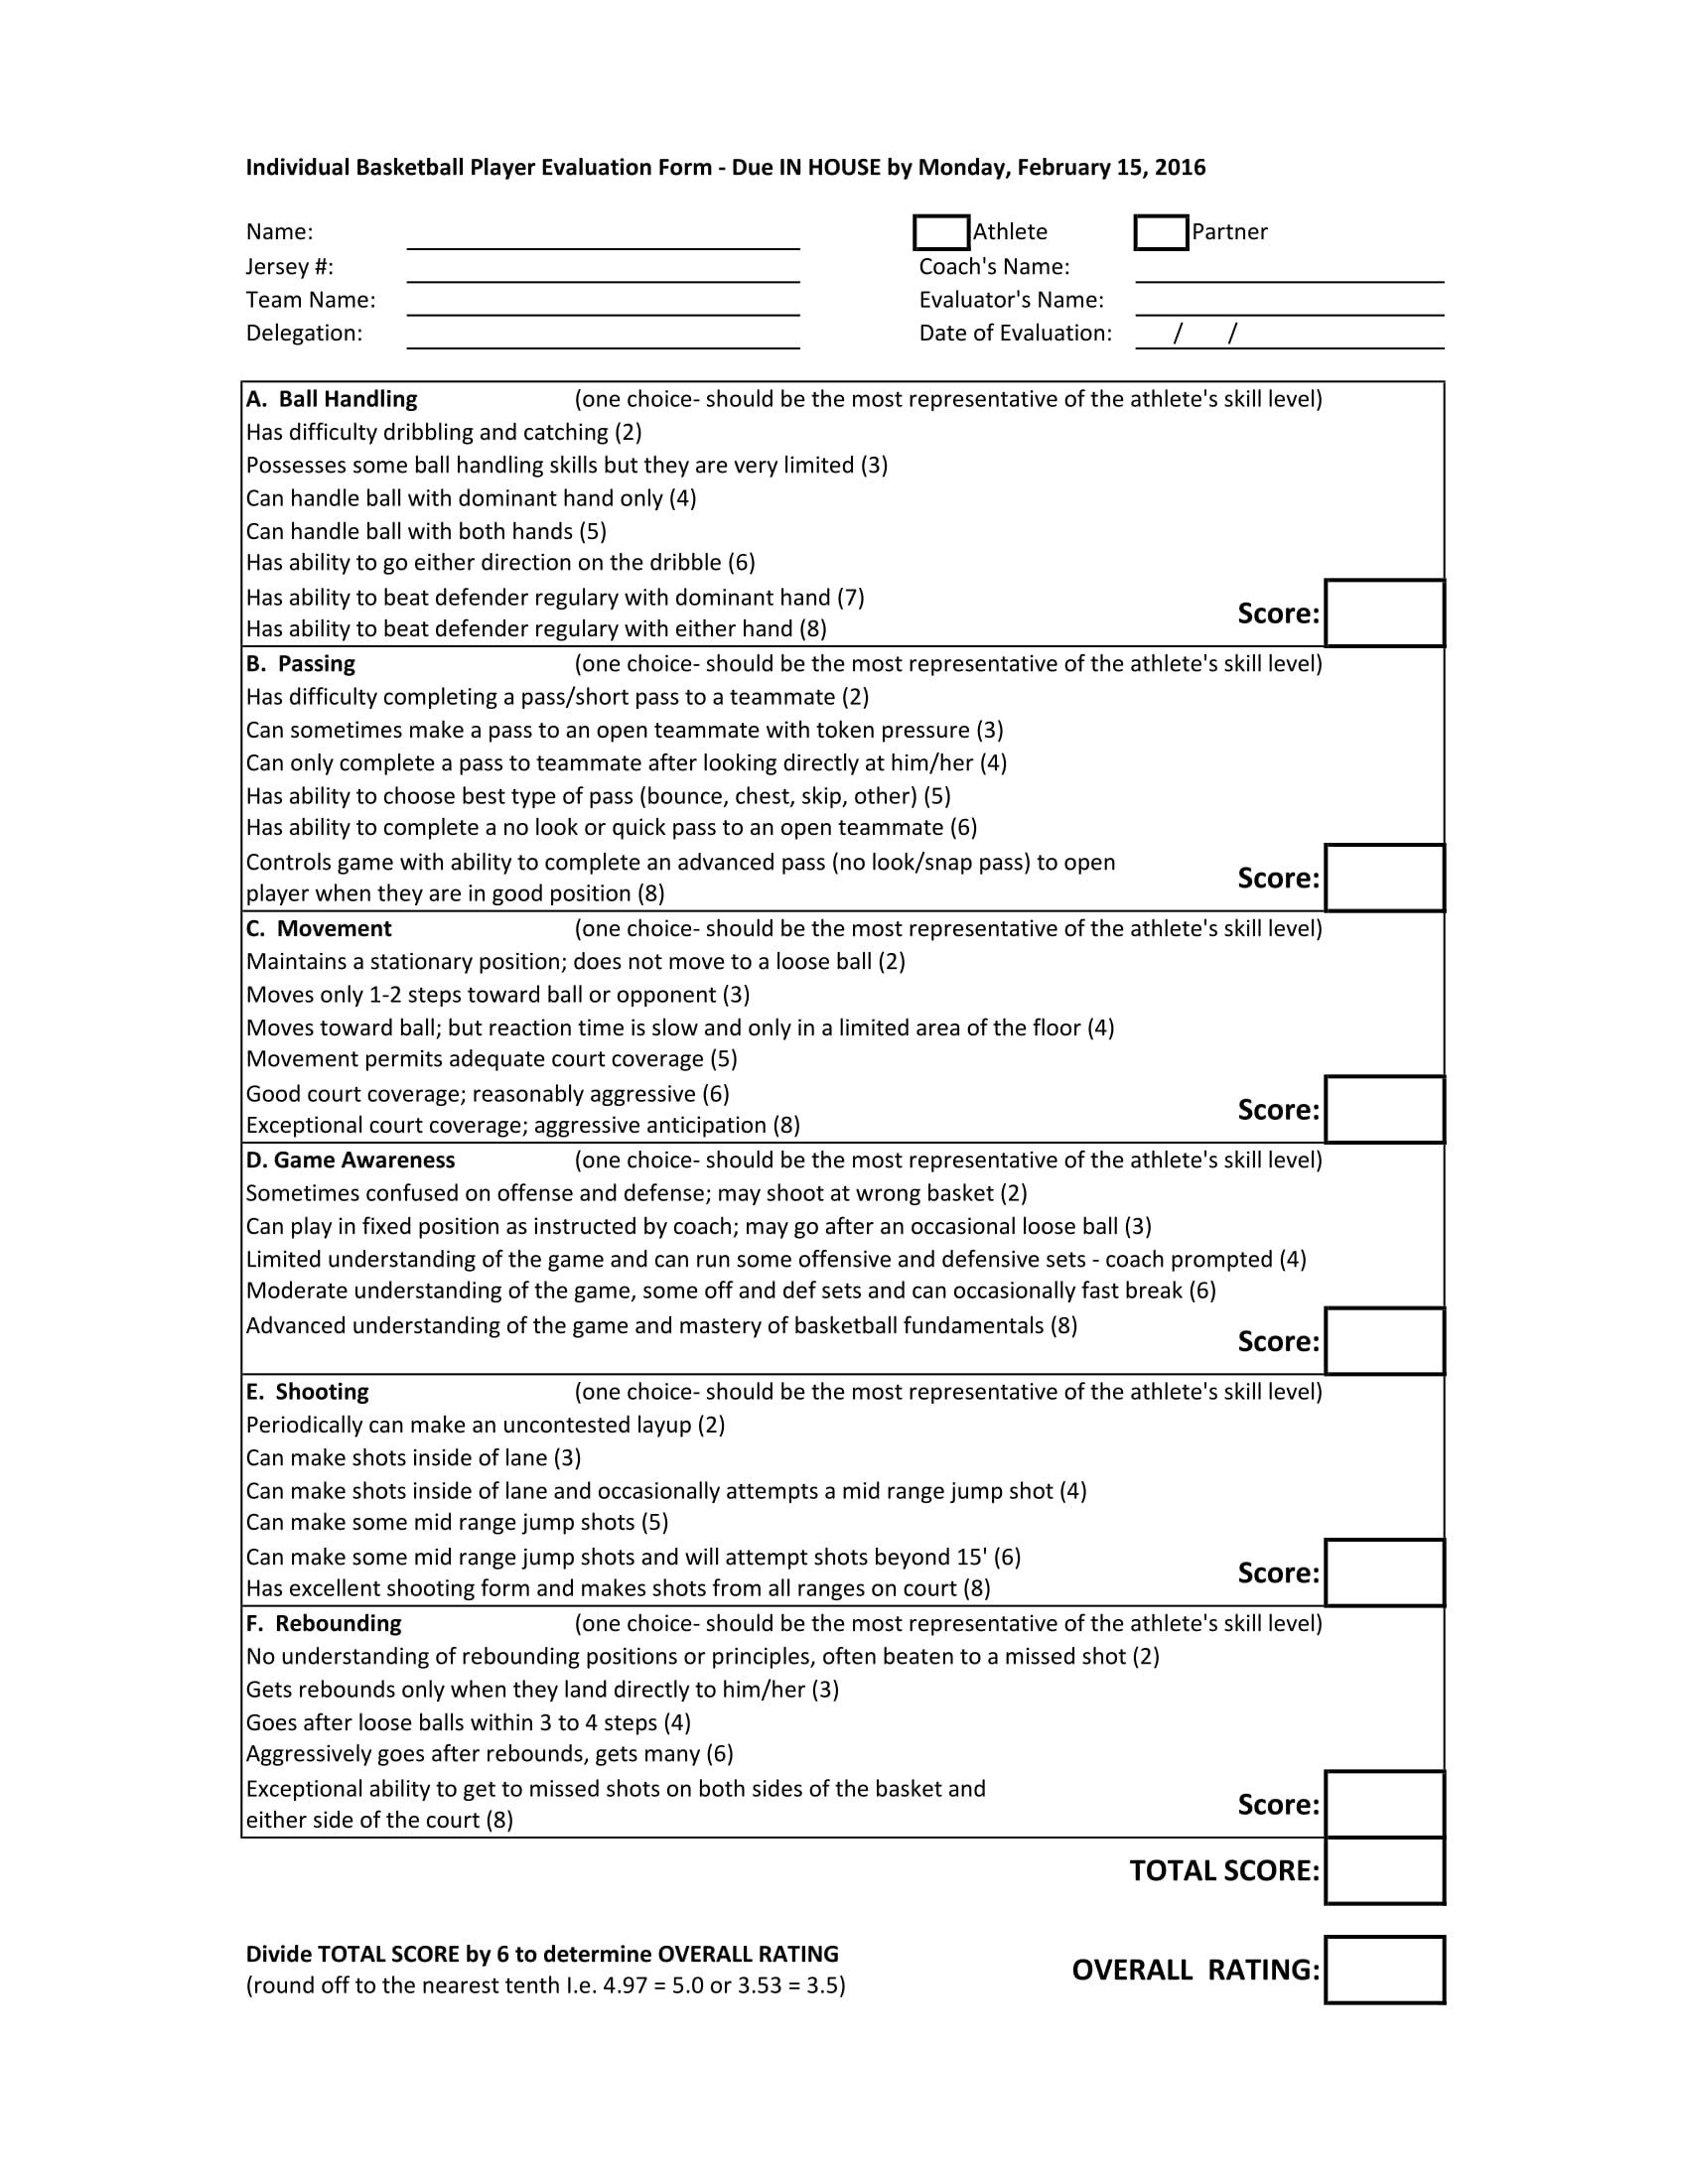 Basketball Player Evaluation form 5 Examples Of Evaluation forms for Sports